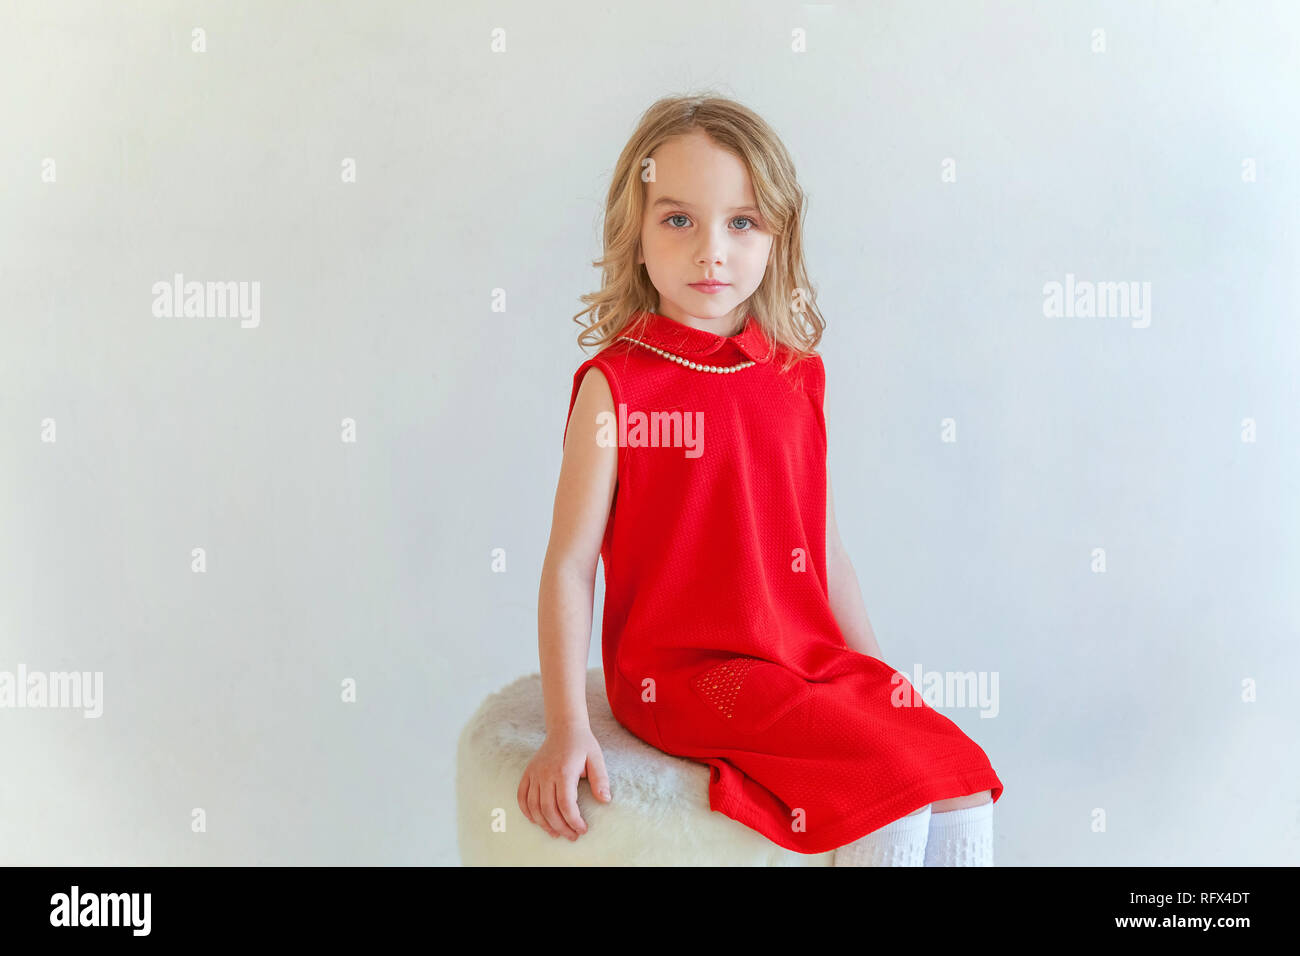 Sweet happy little girl in red dress sitting on chair against white ...